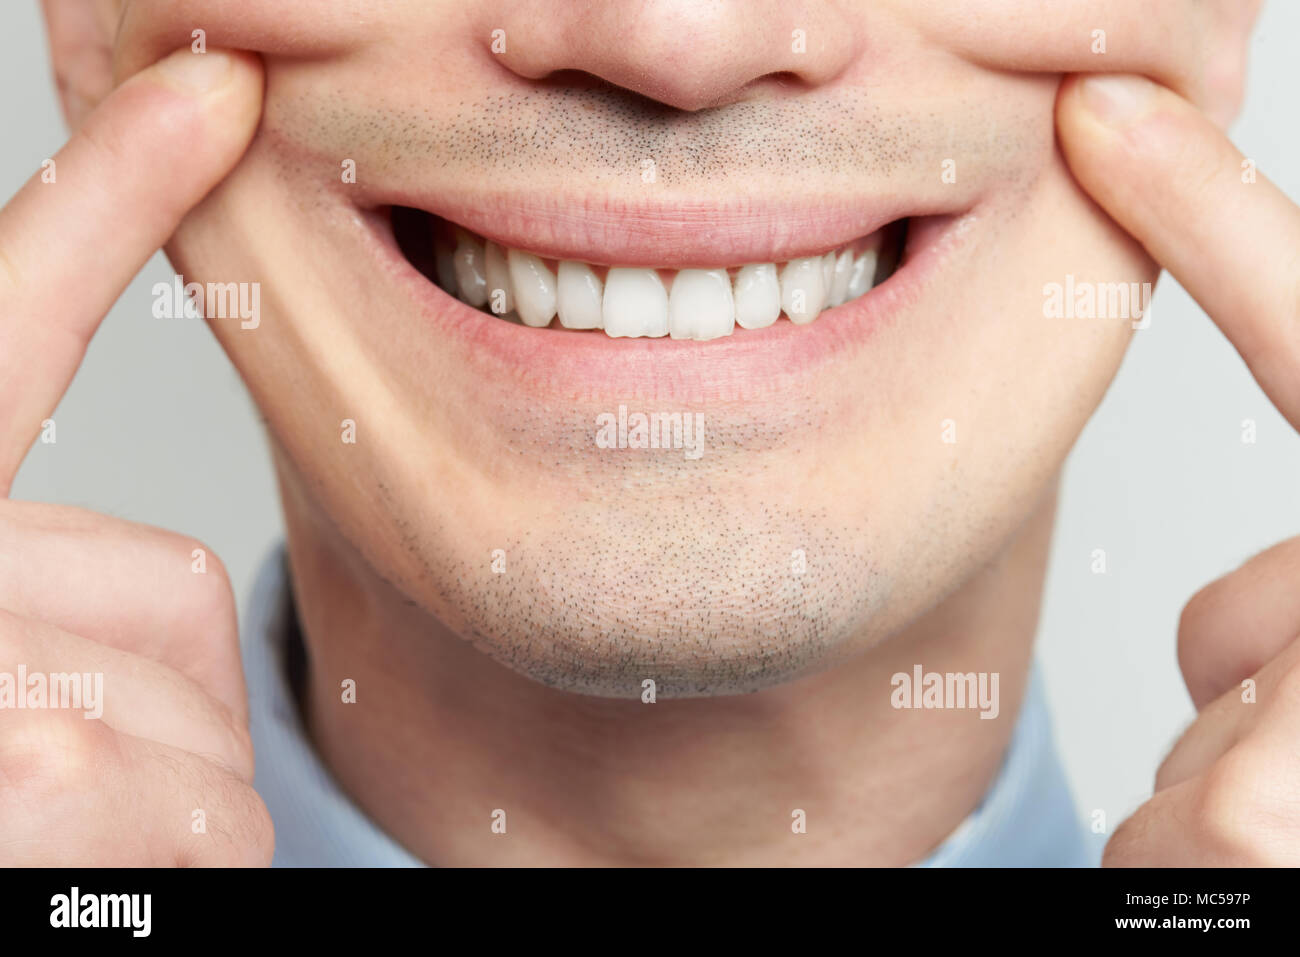 Making fake smile with teeth and fingers close up Stock Photo